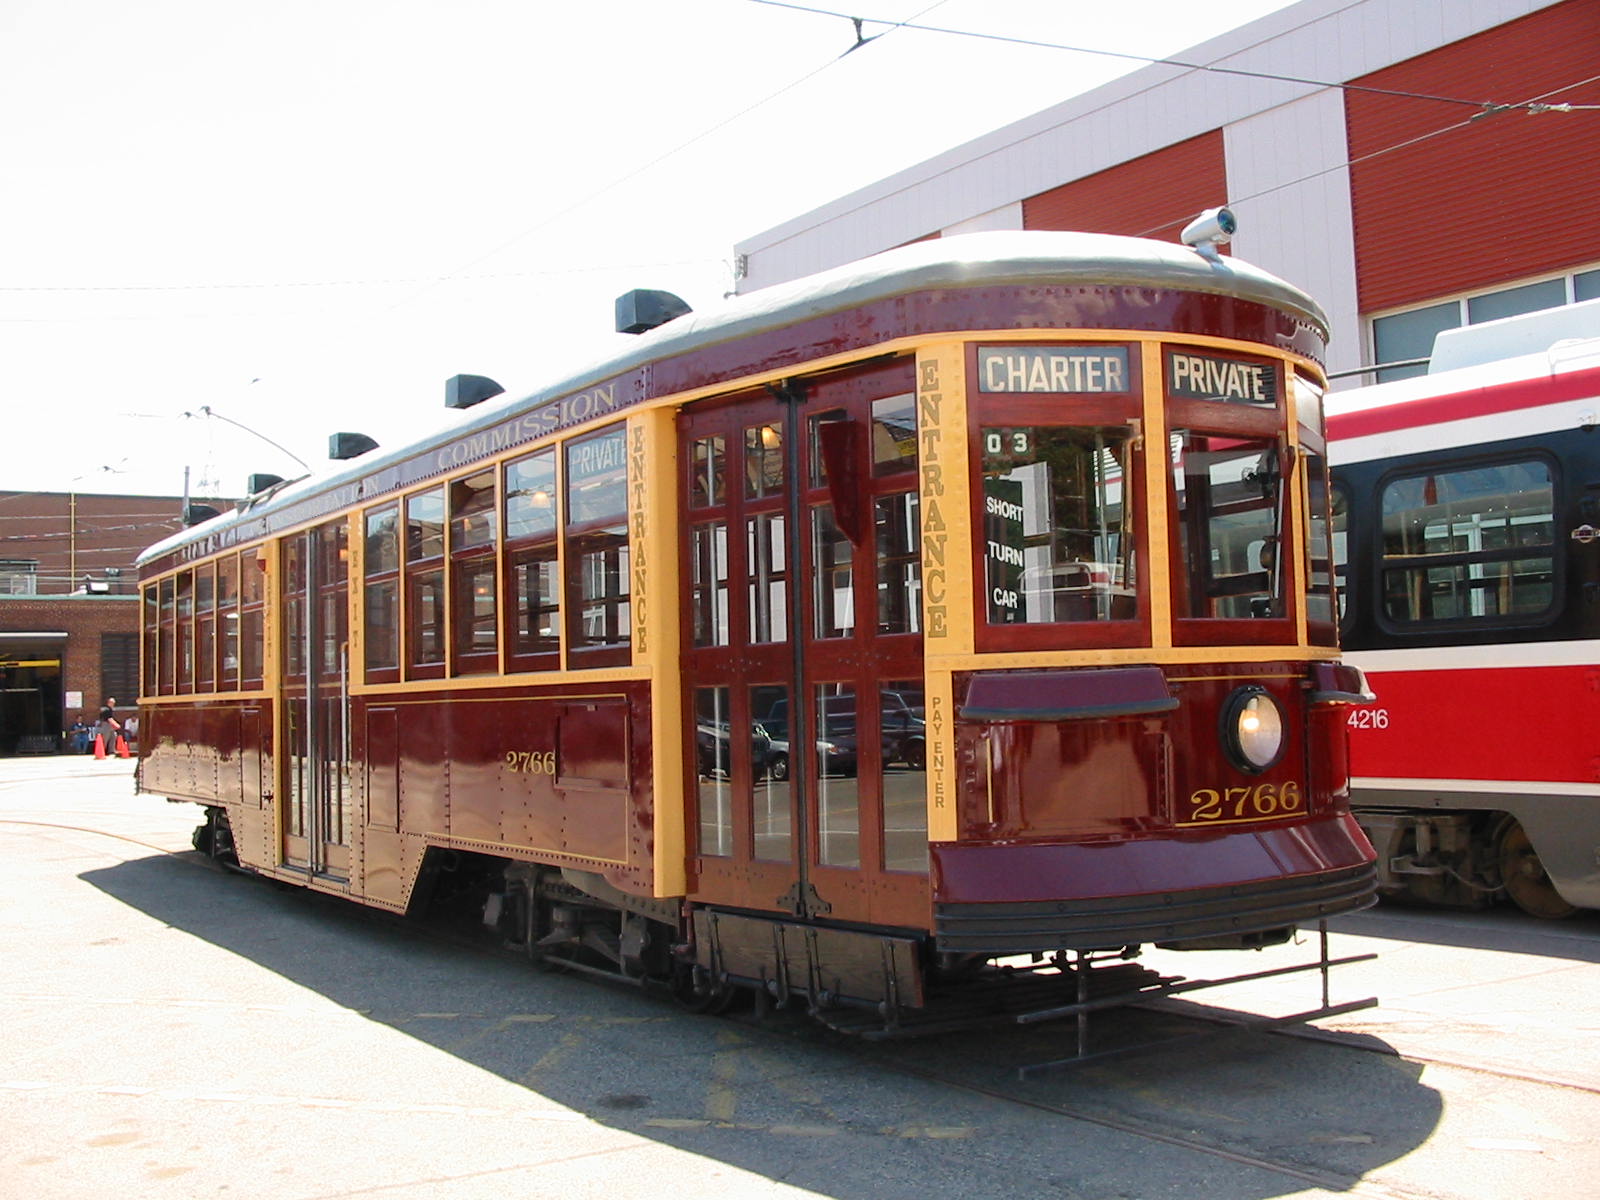 Toronto To Get Vintage Streetcars This Summer - Narcity